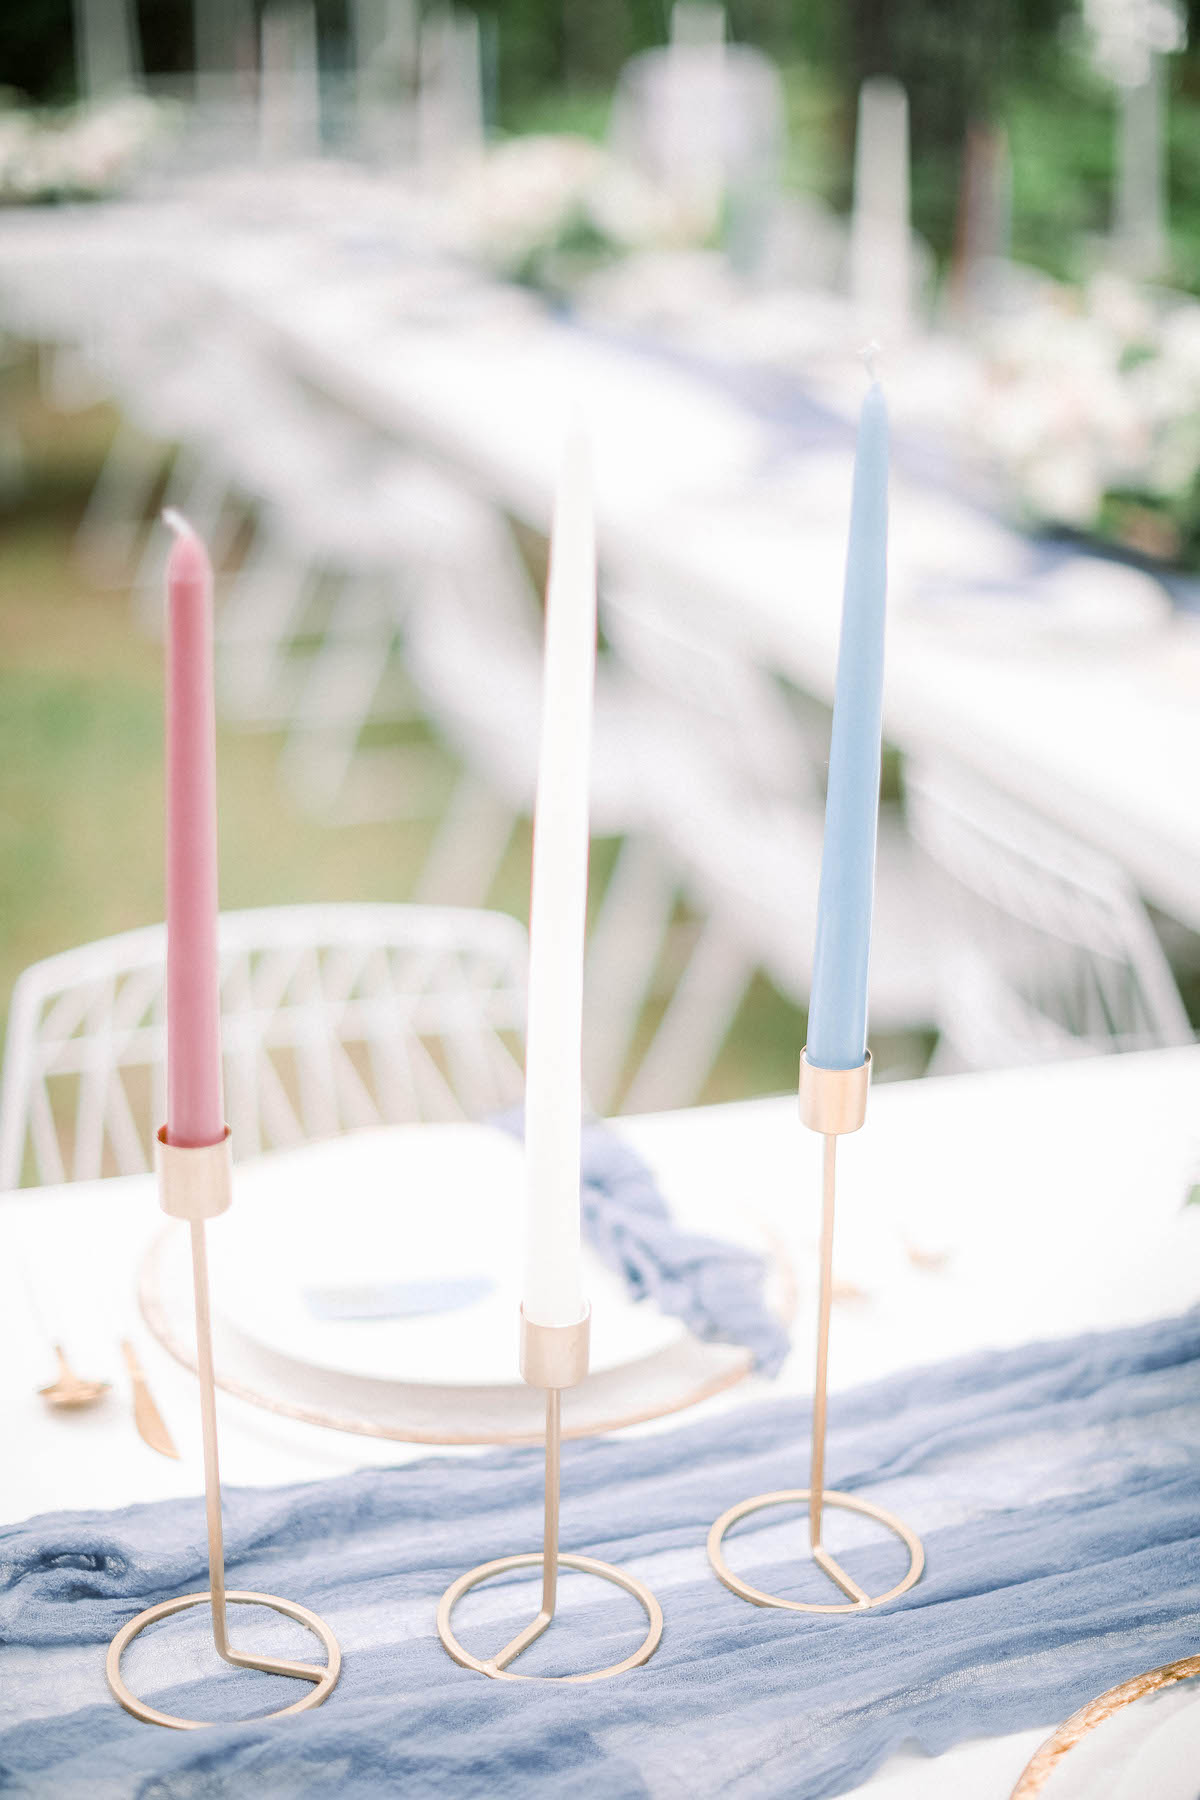 Blue, white, and red taper candle wedding decor